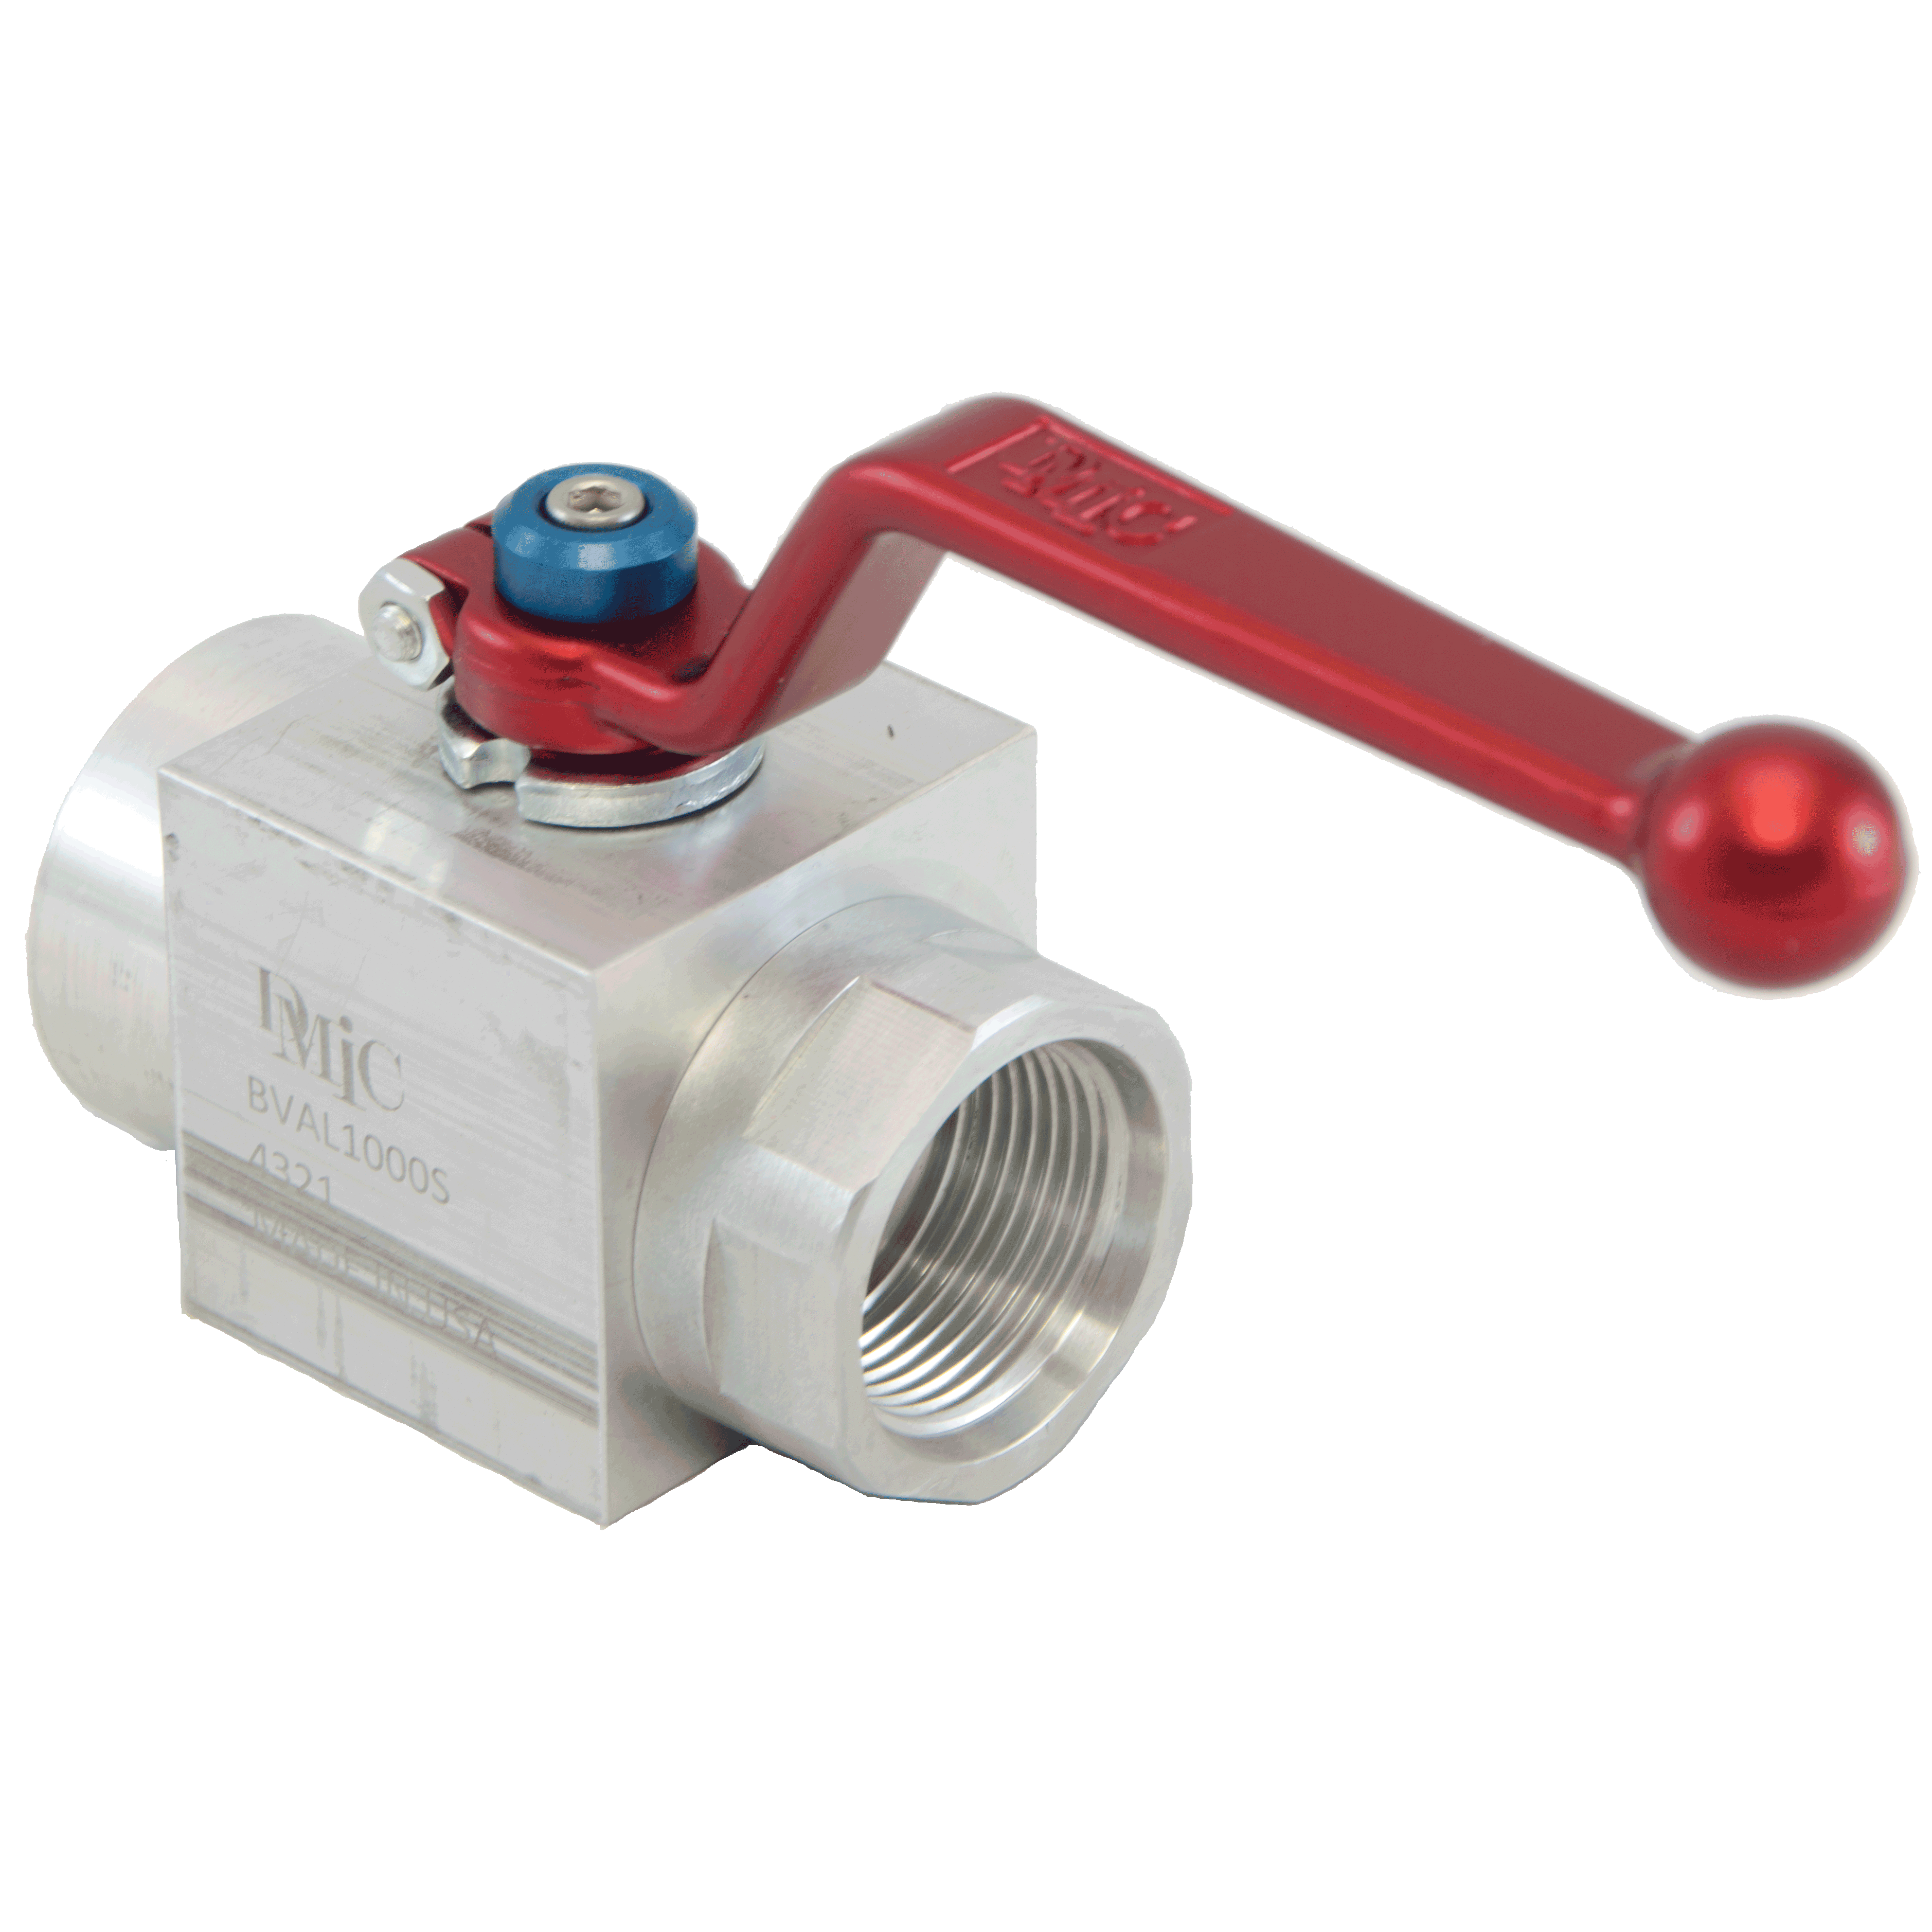 BVAL-0375S-4321-AZZN : DMIC Suction Ball Valve, #6 SAE (3/8), Aluminum, 600psi, Two-Way, with Locking Handle